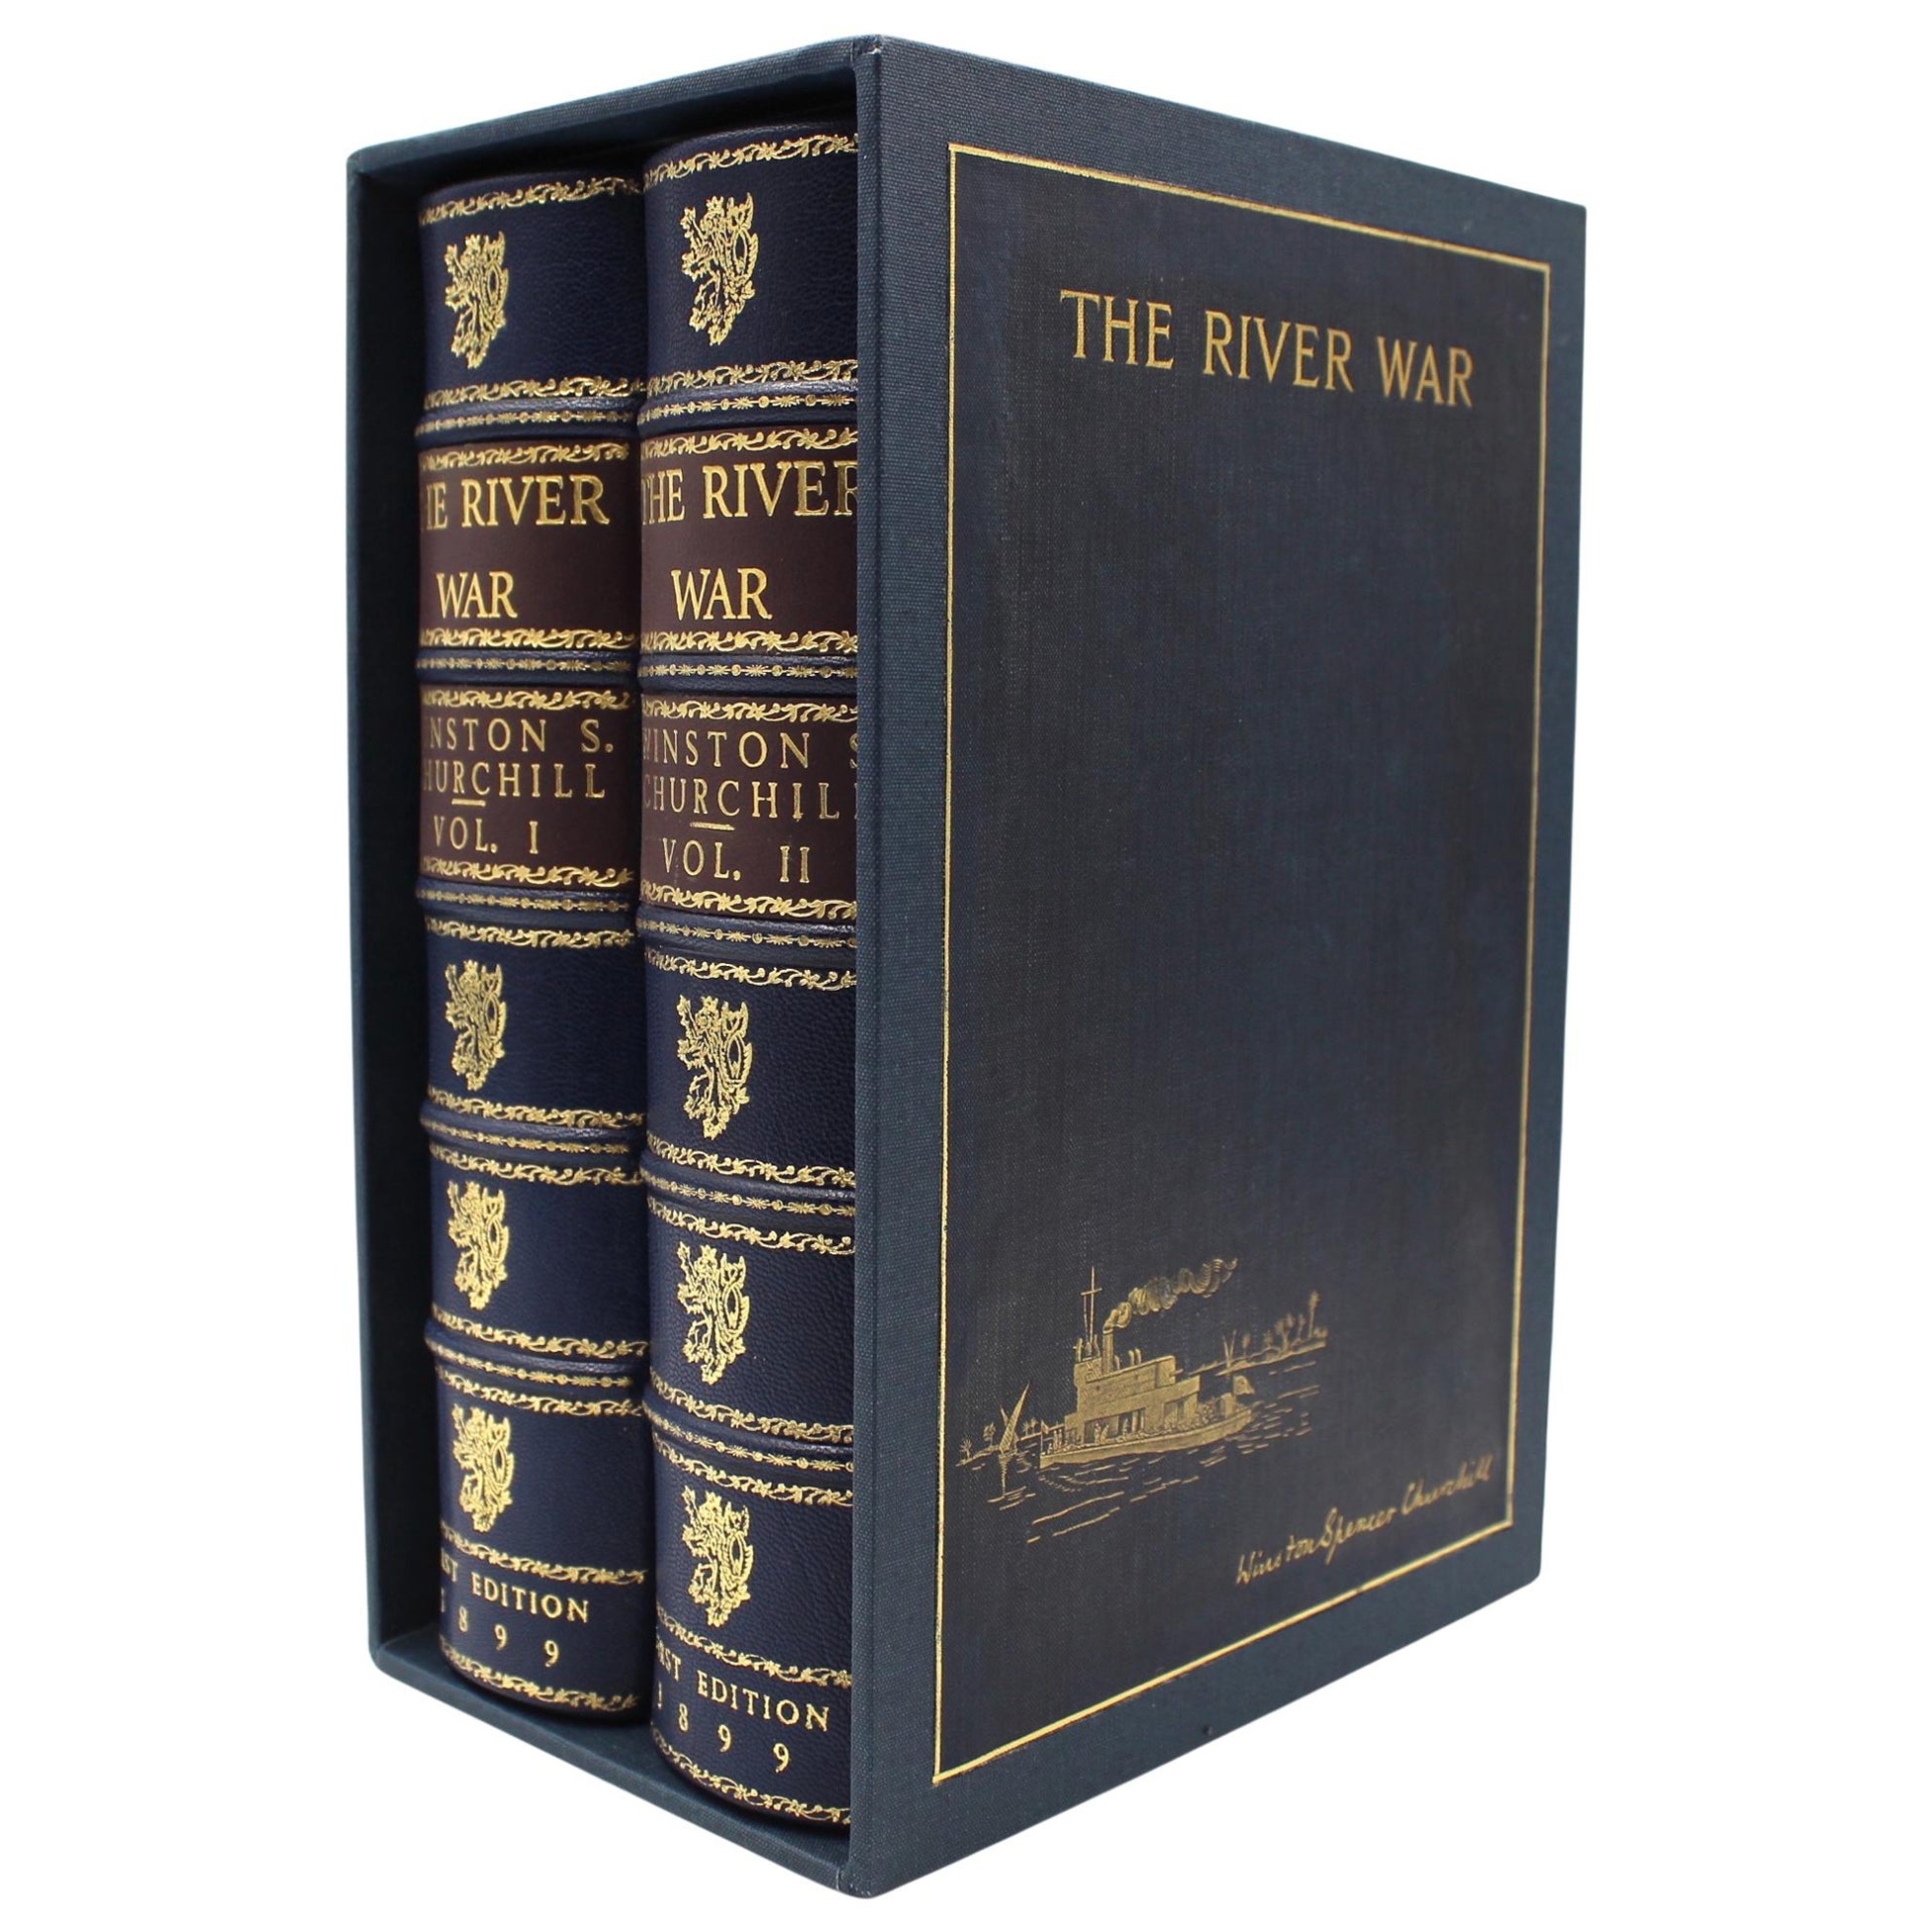 The River War by Winston S. Churchill, First Edition, Two Volume Set, 1899